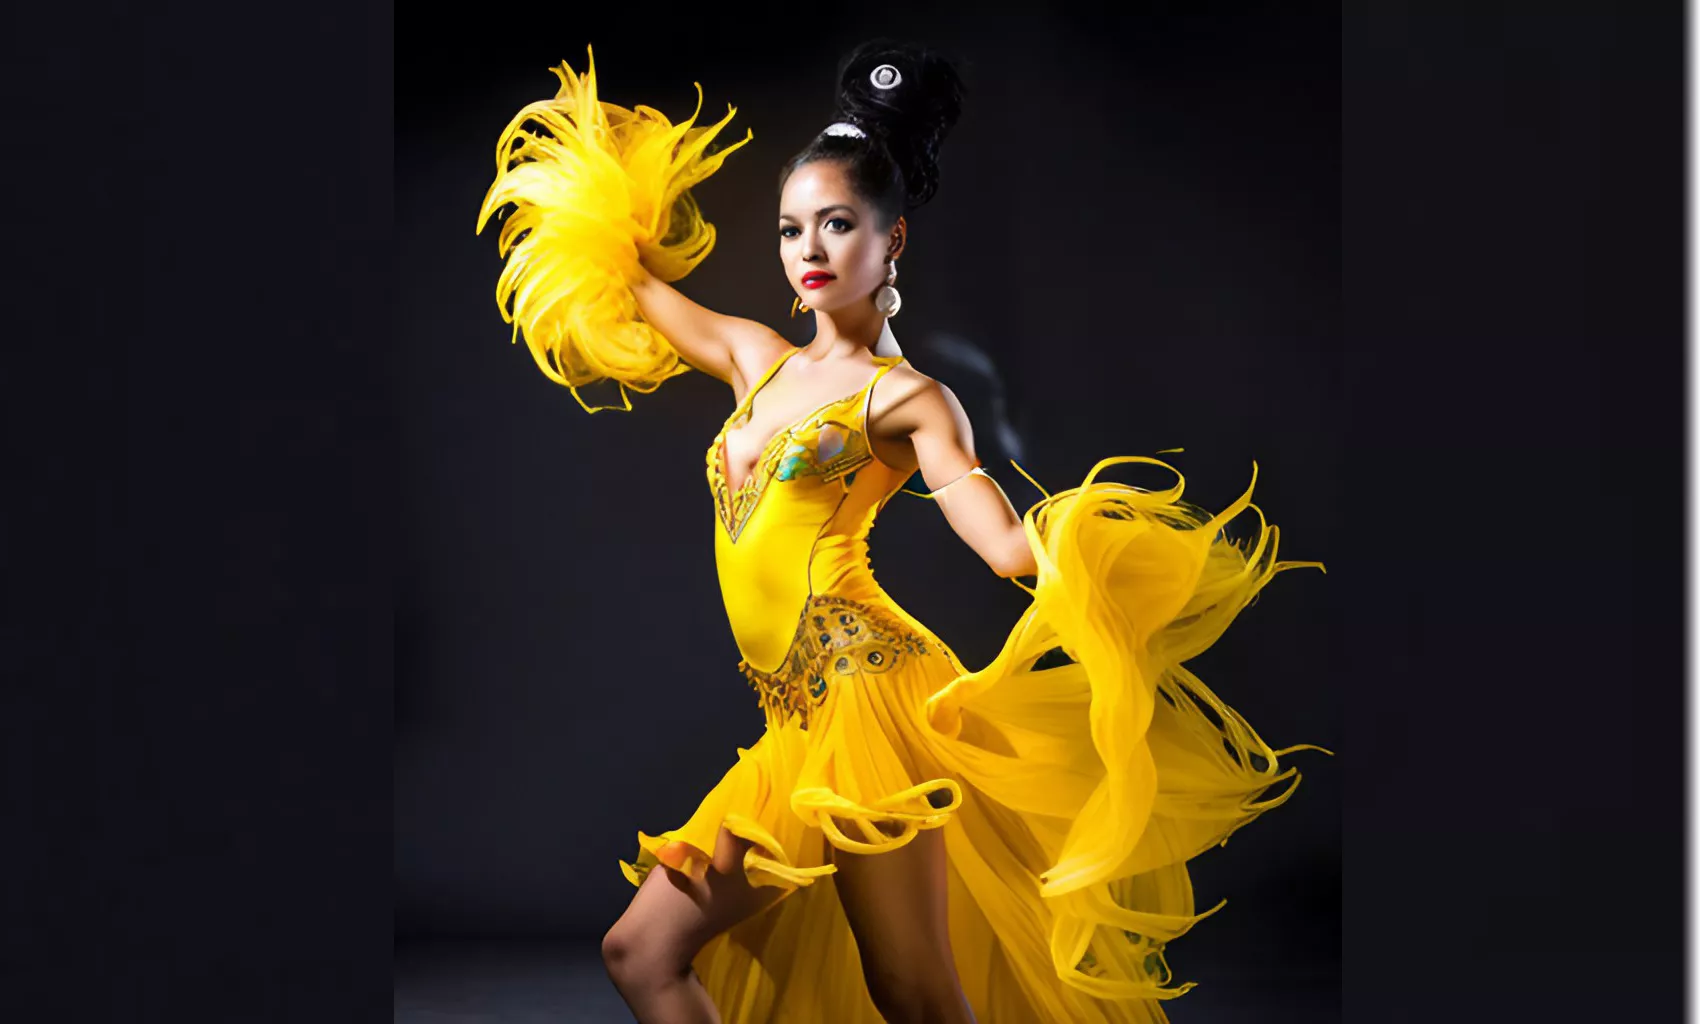 Style It Up: Creative Dance Costumes Ideas for Each Genre